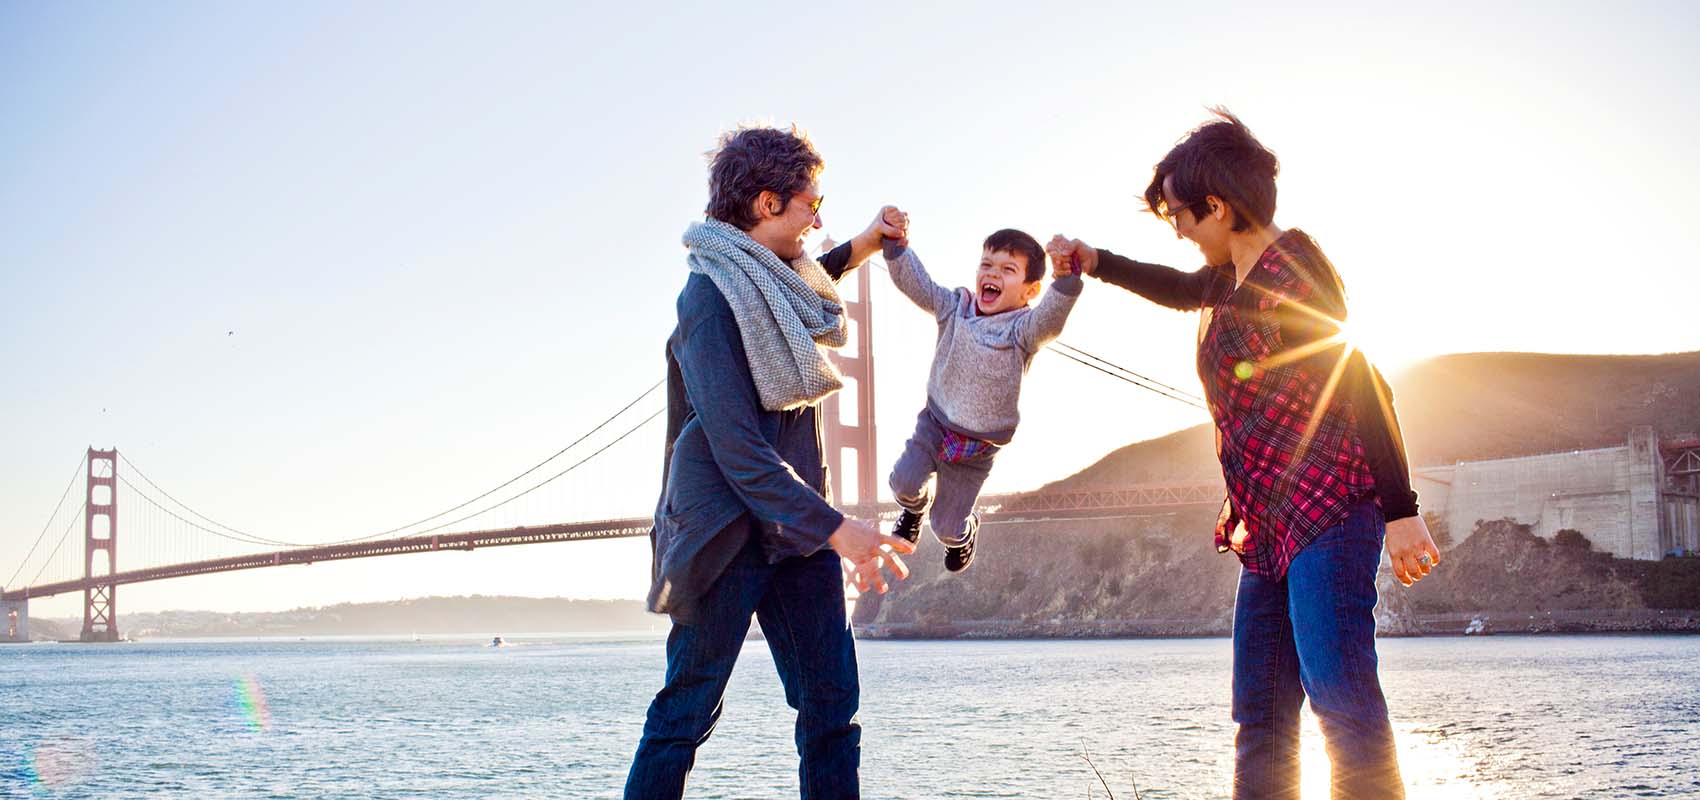 Two moms playing with toddler in front of Golden Gate Bridge, San Francisco, California, USA